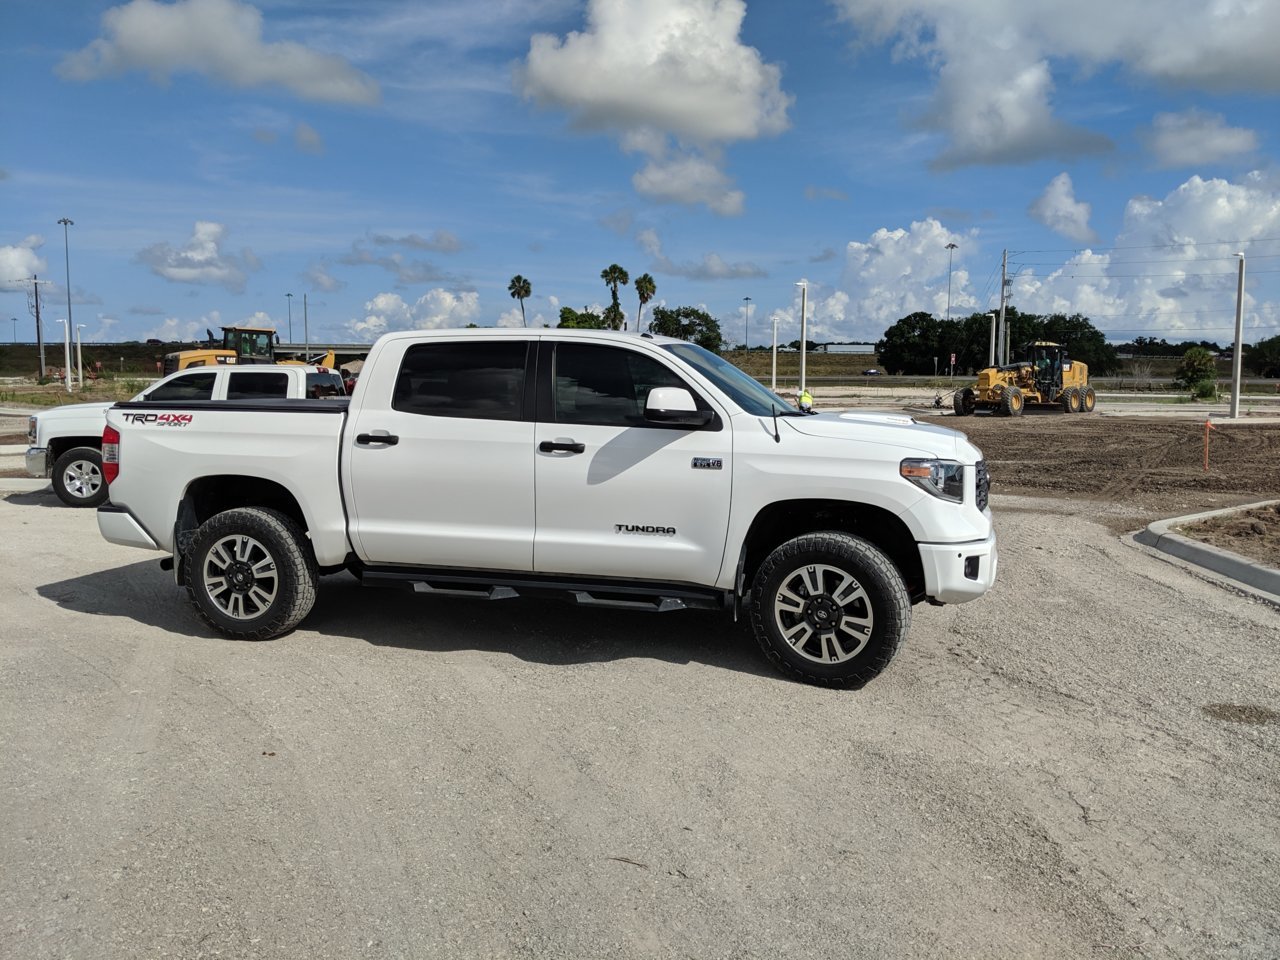 3/1 front and rear leveling kit | Toyota Tundra Forum